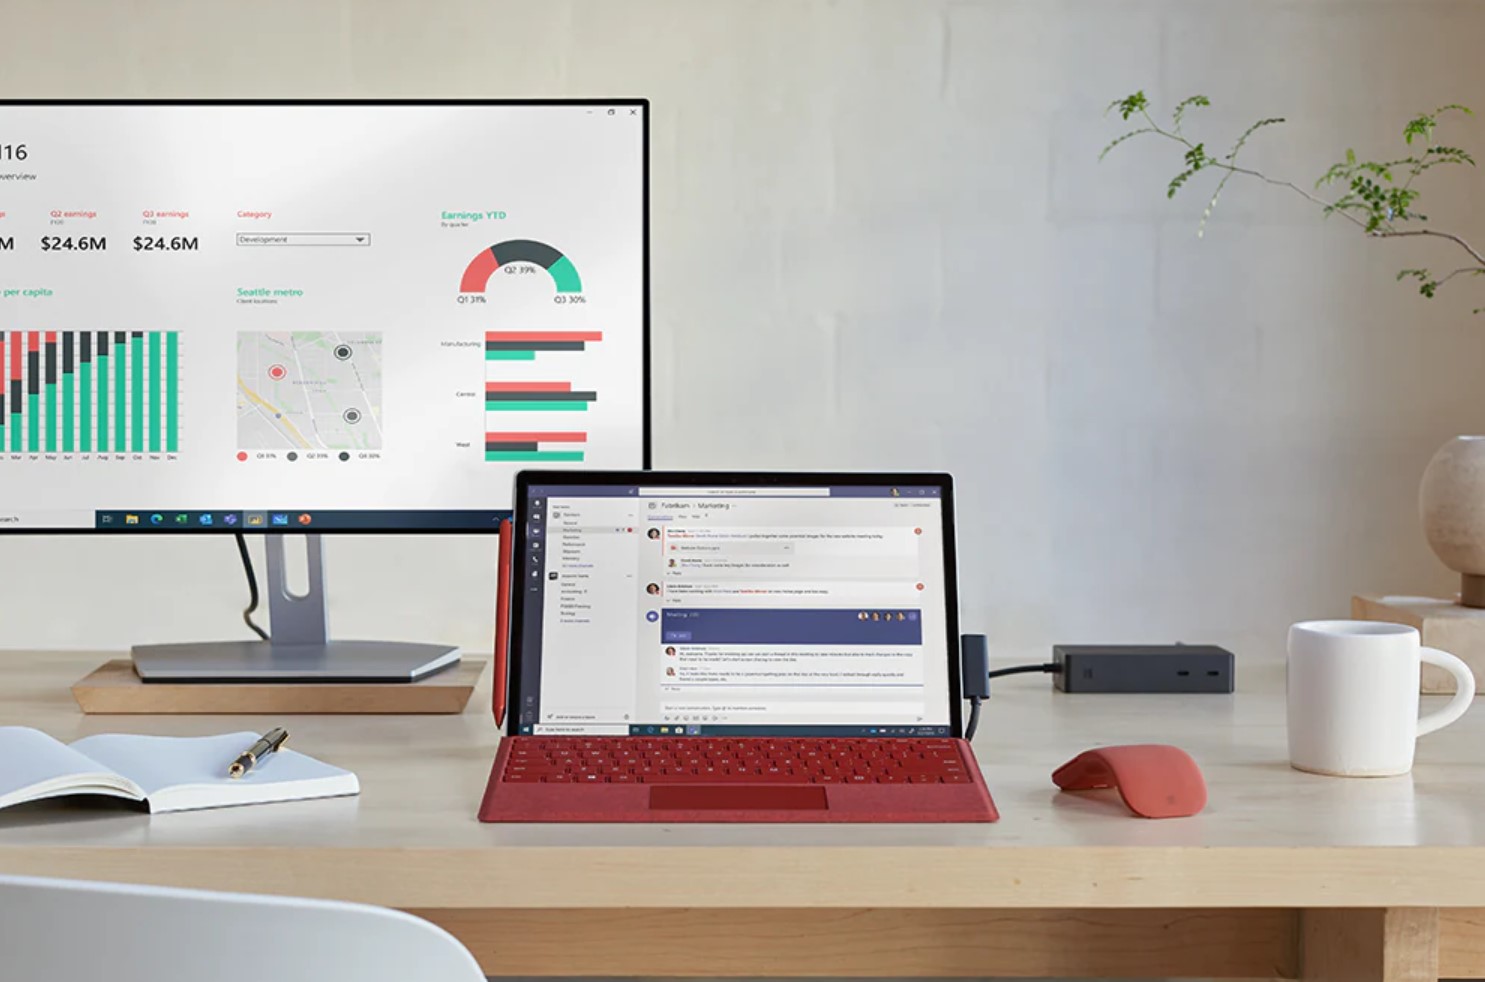 Microsoft Surface Pro 7+ 2-in-1 laptop